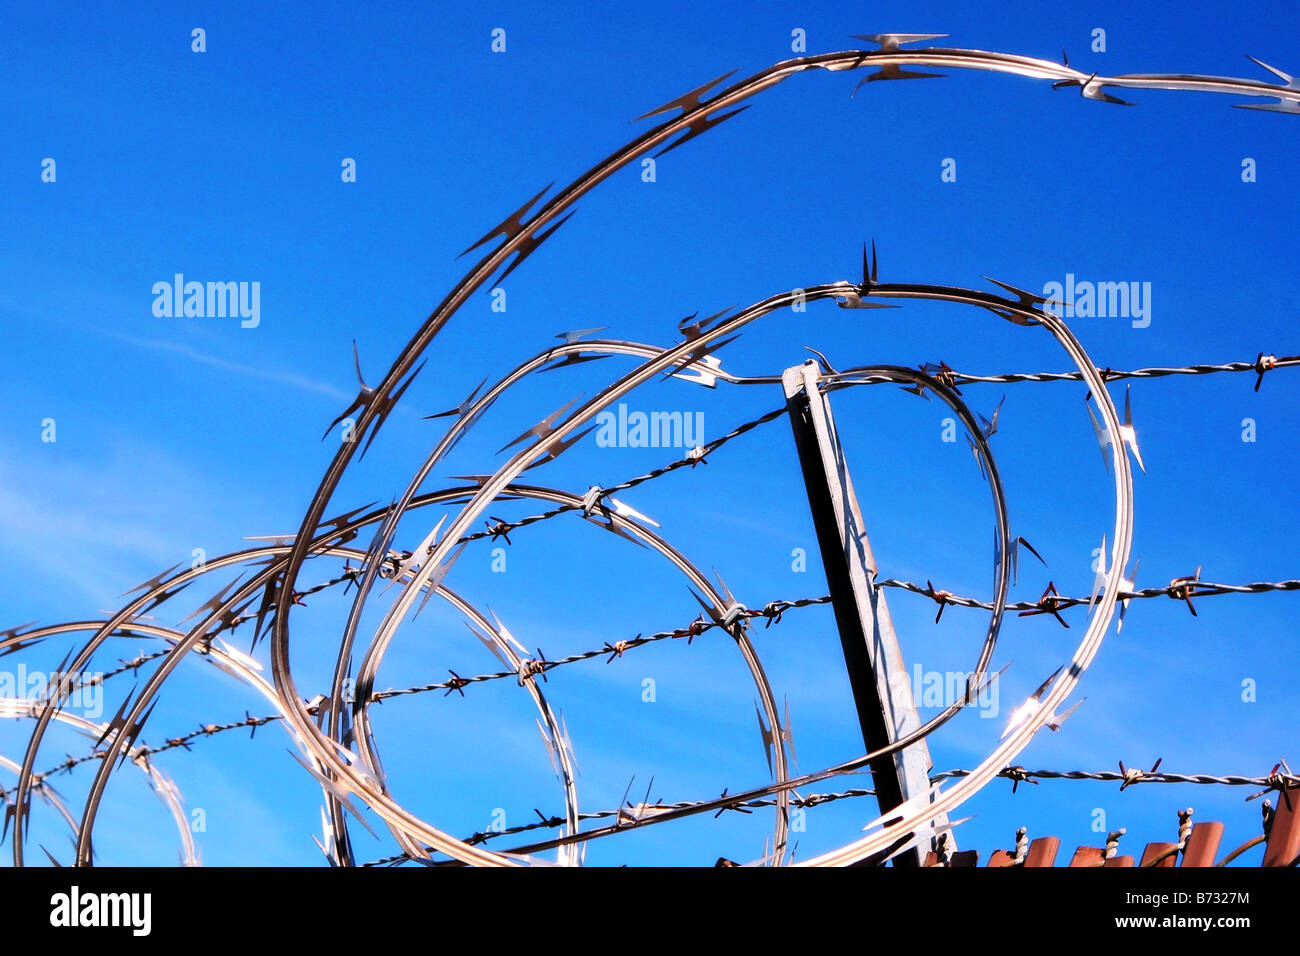 Image of loops of brightly sparkling brand new razor wire set against a beautiful blue sky Stock Photo